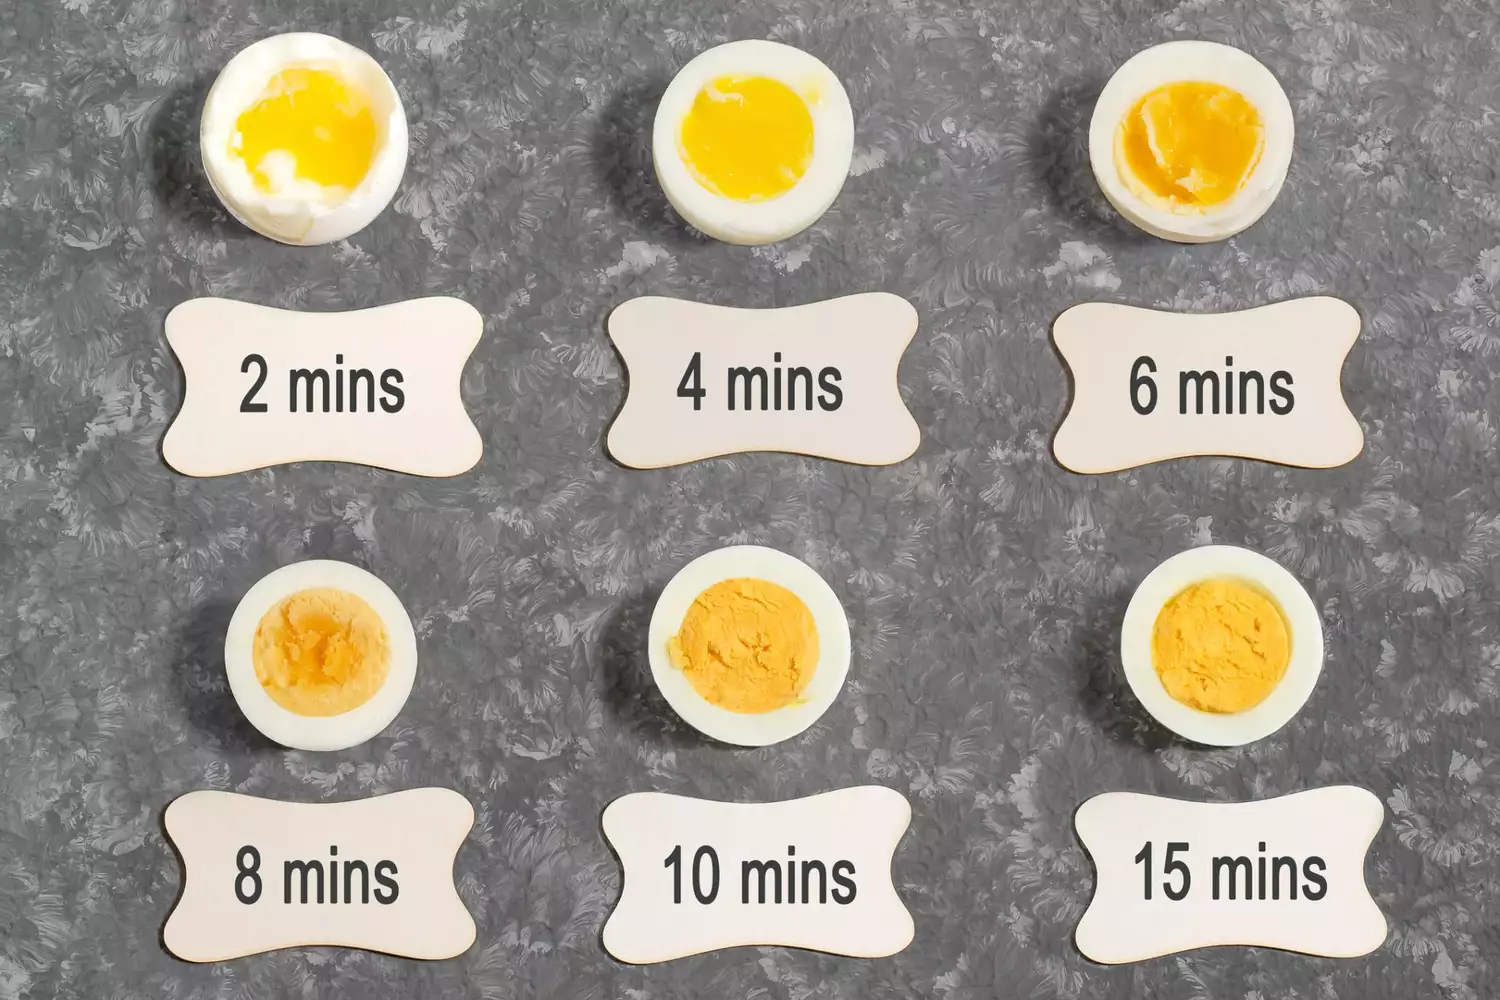 How to boil eggs, corn on the cob